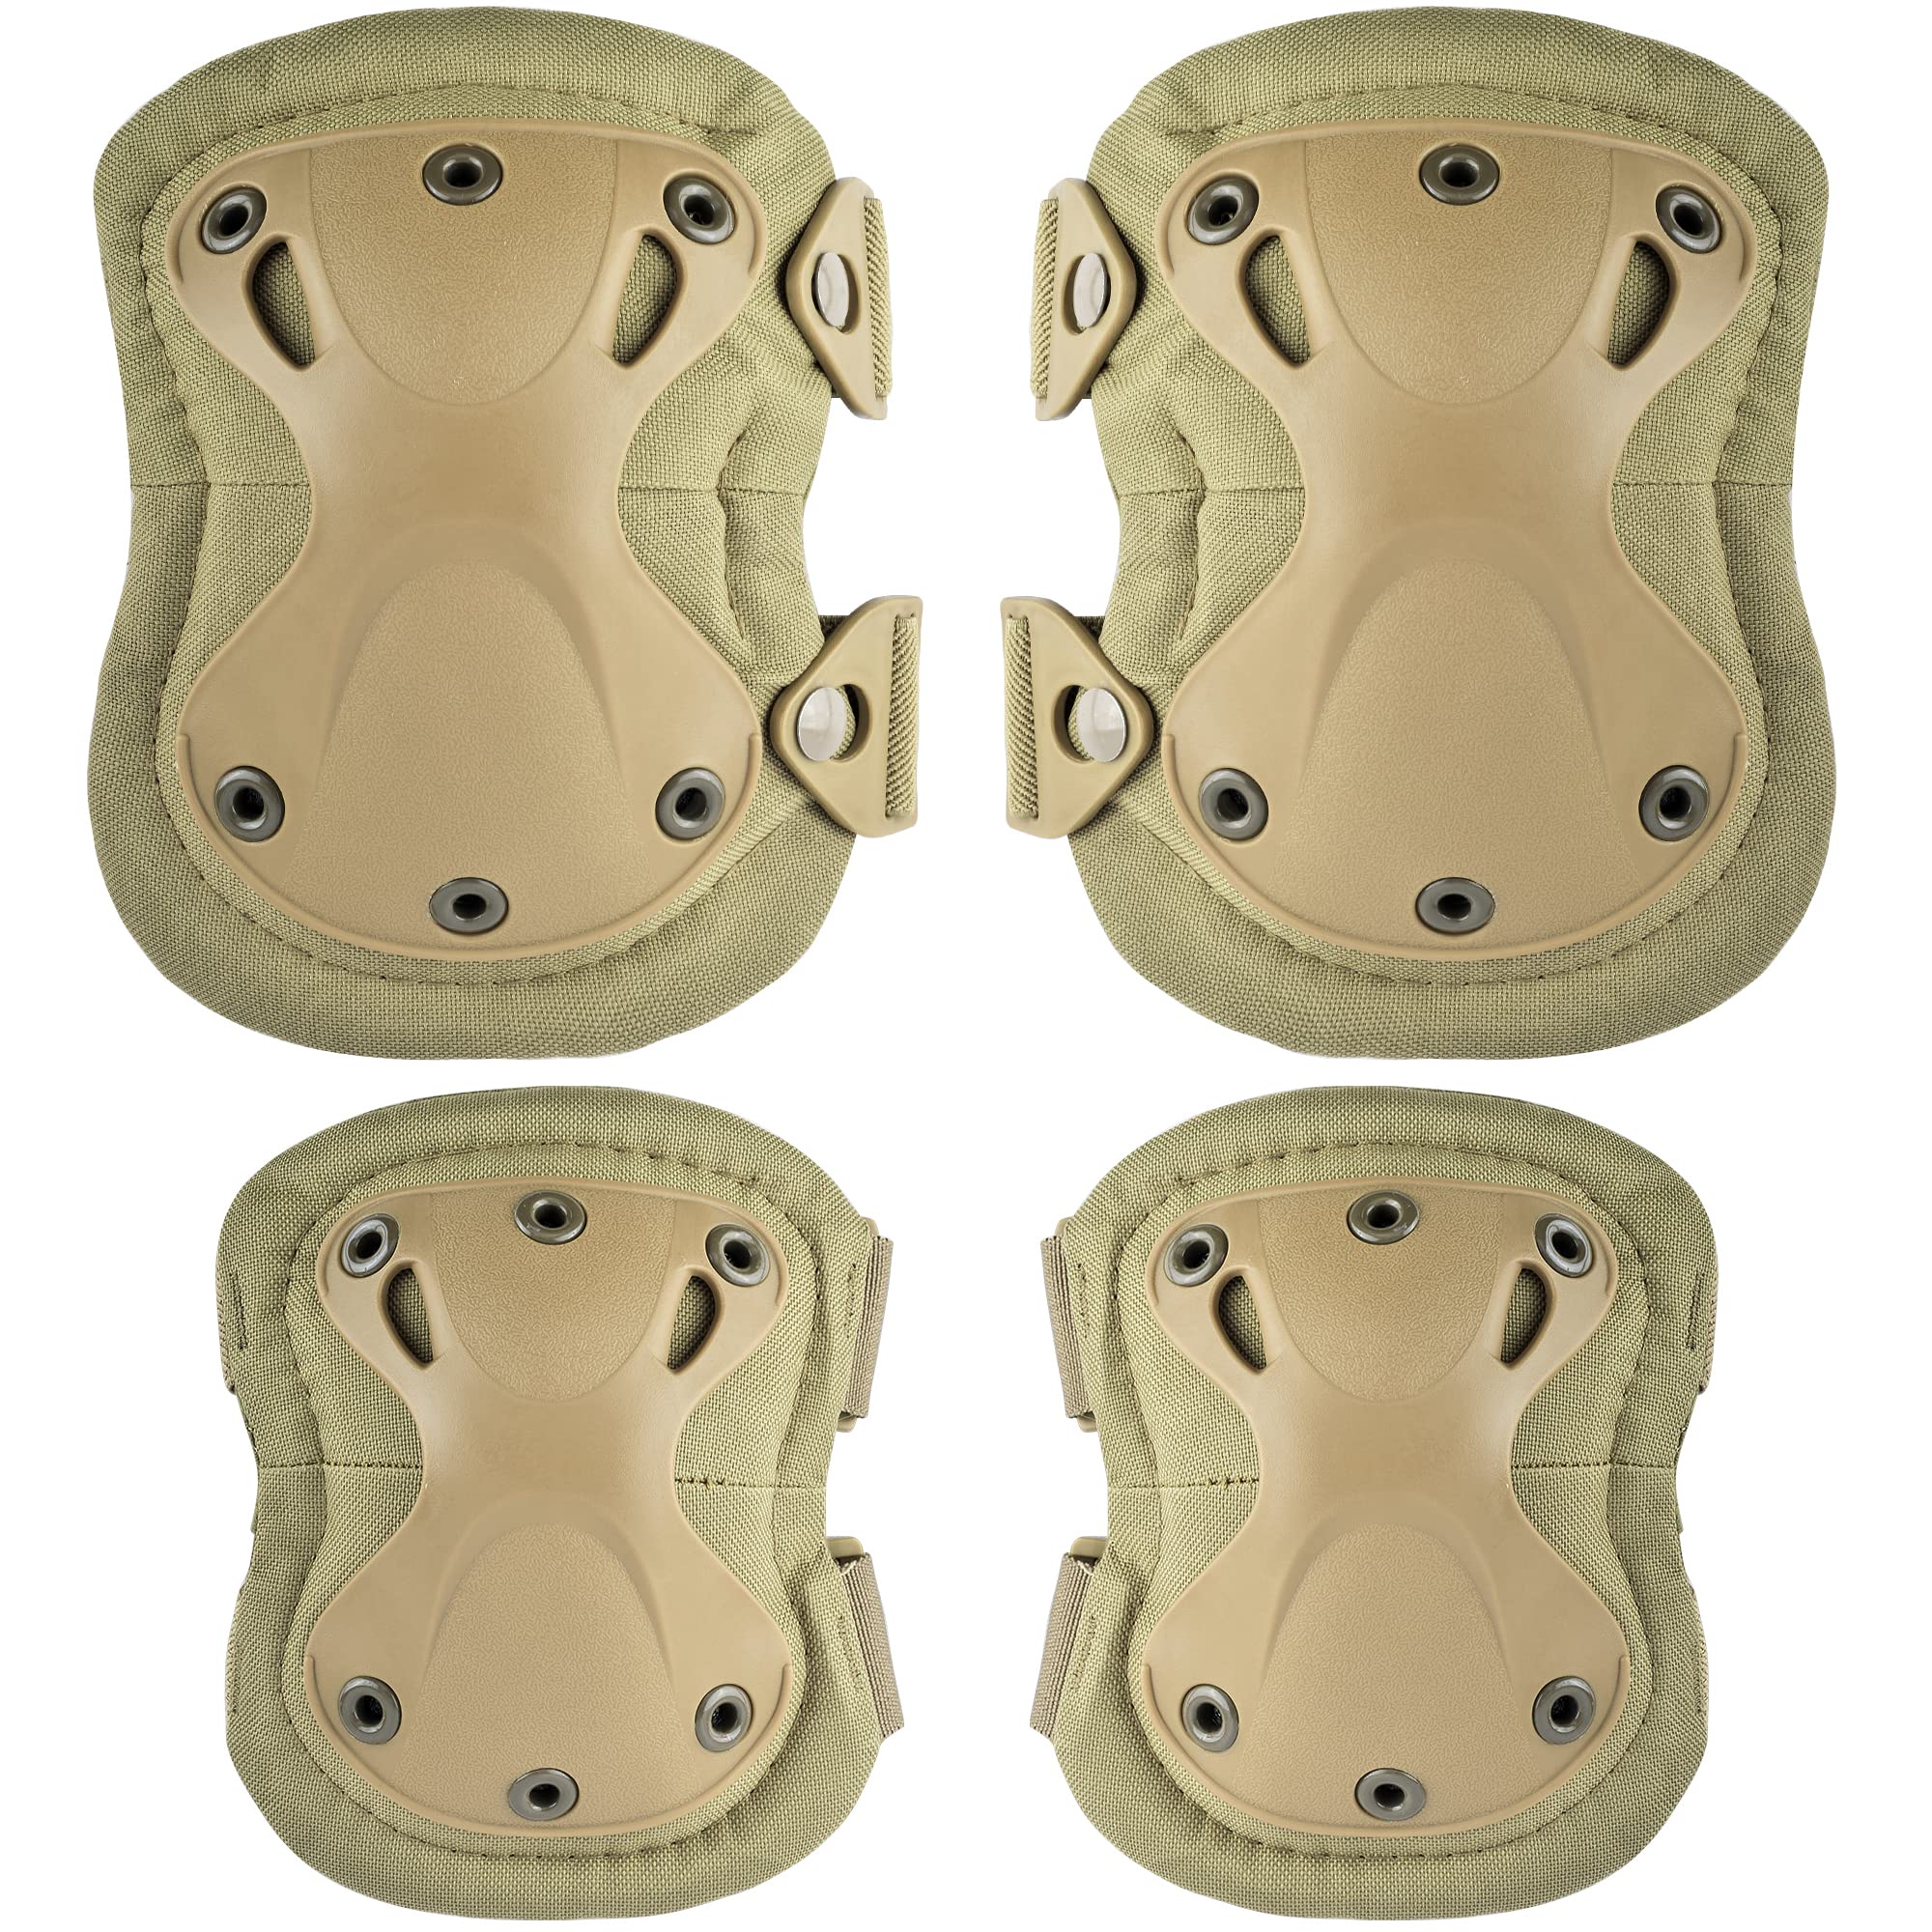 Professional Tactical Combat Knee and Elbow Protective Pads Sets Advanced  Tactical Gear Set for Airsoft Paintball Hunting Army Skate Outdoor Sports  (Tan)